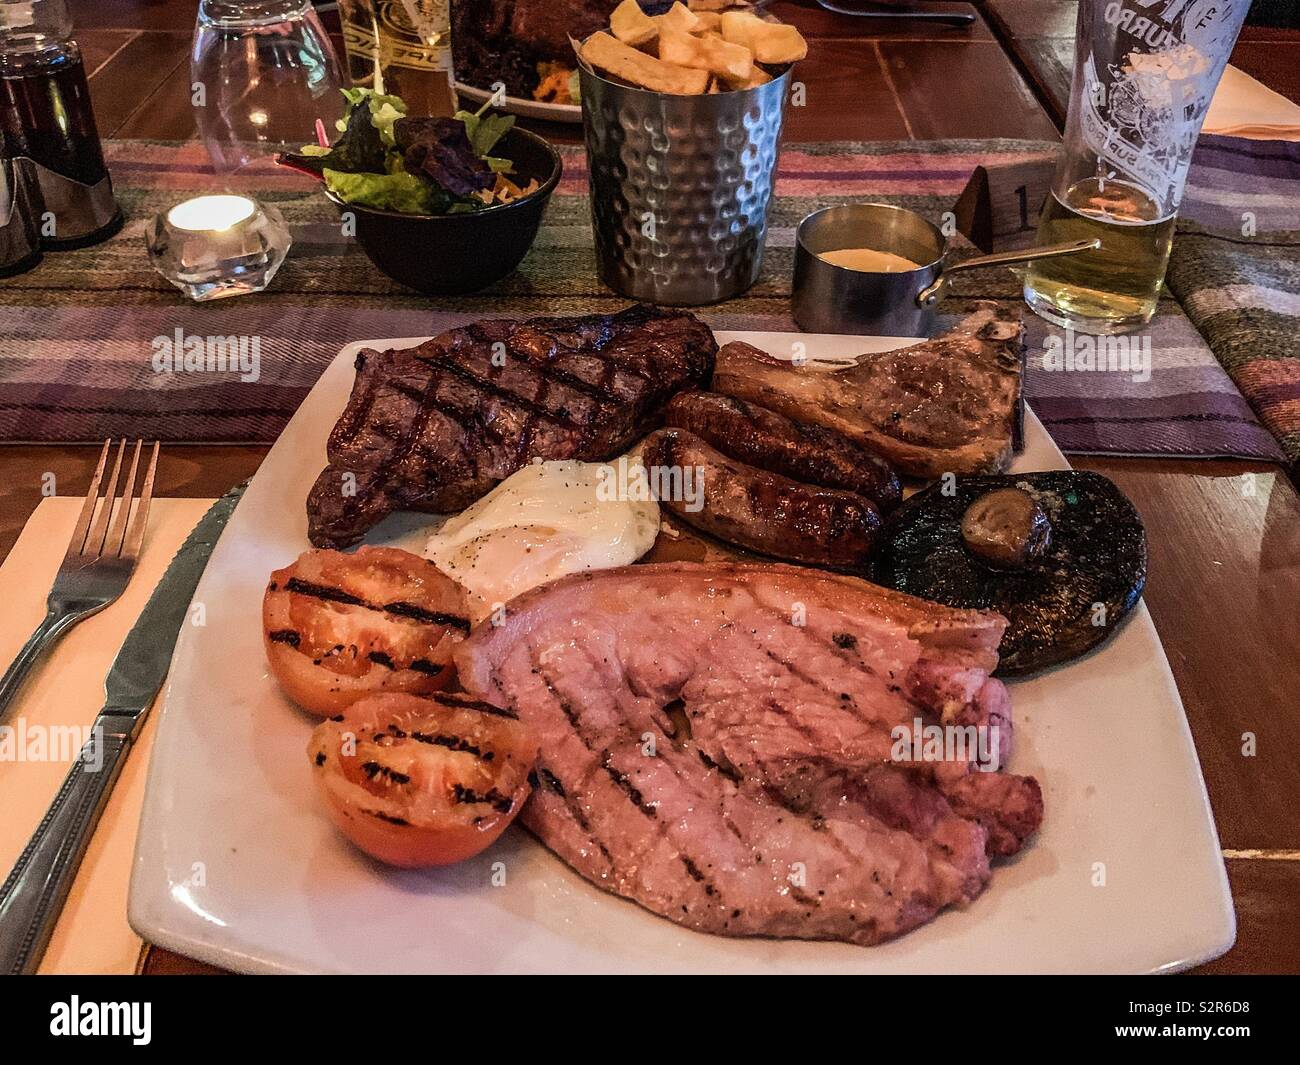 Mixed grill in a restaurant Stock Photo